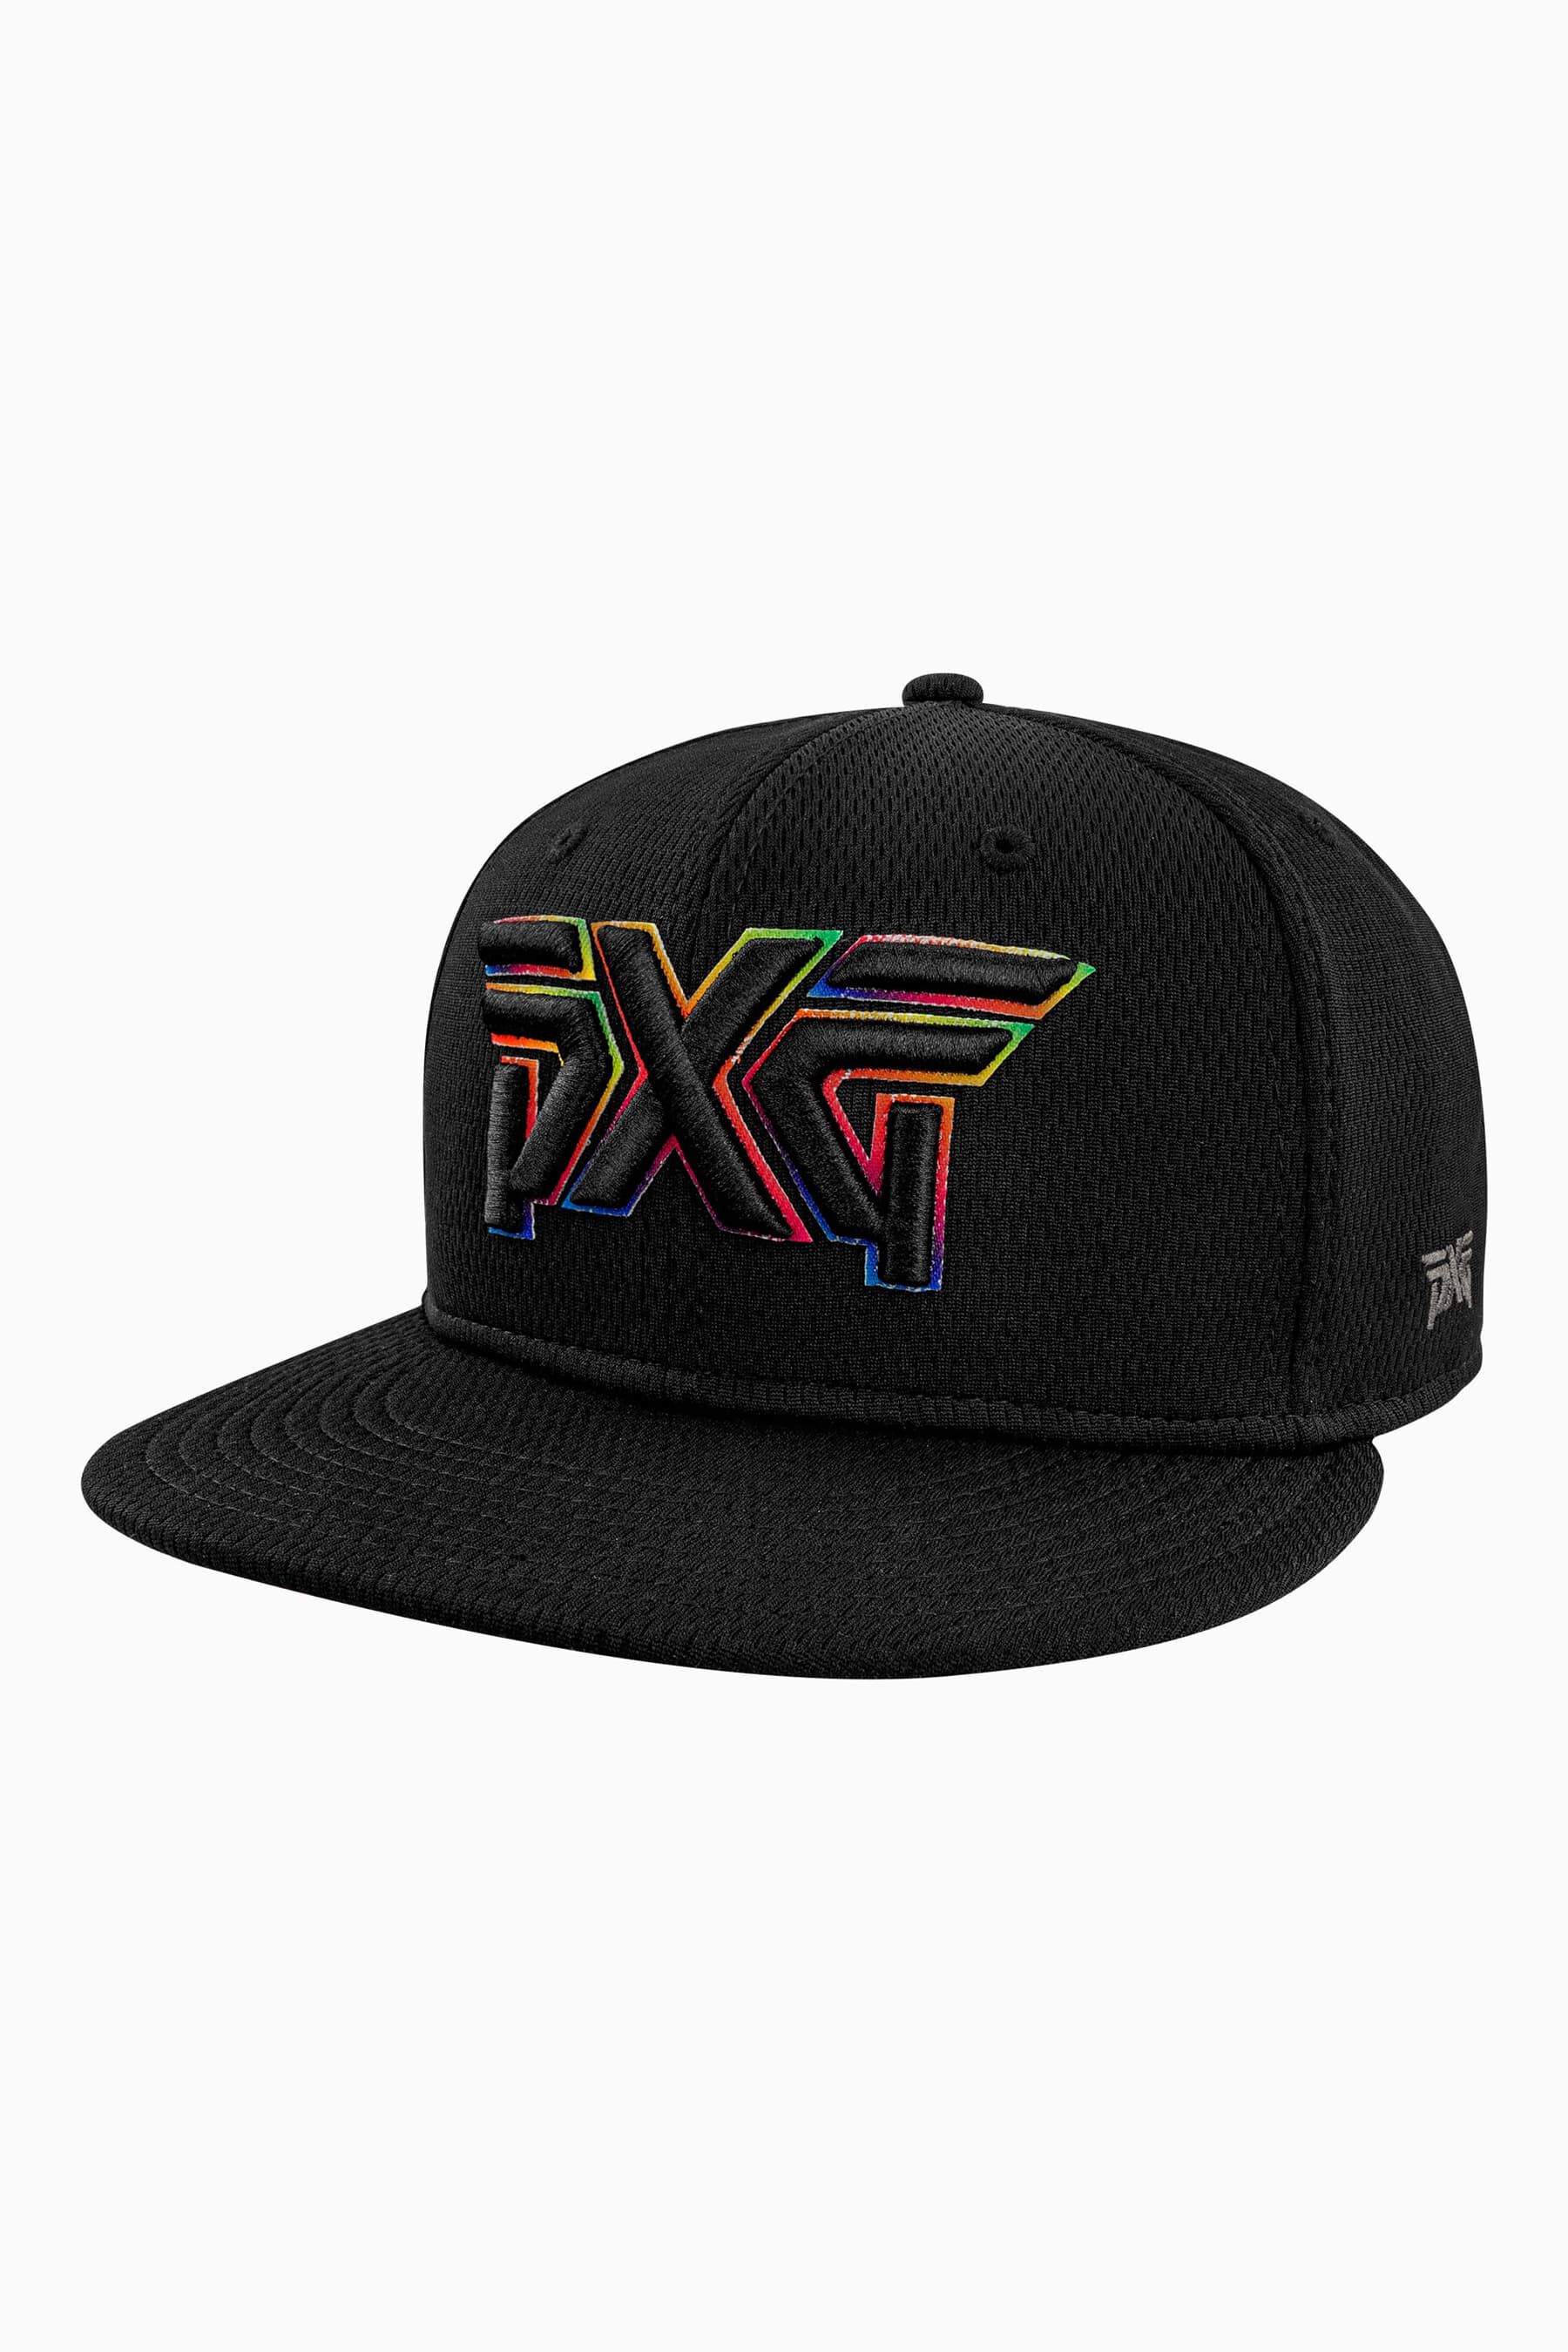 Buy Pride Outline 9FIFTY Snapback | PXG